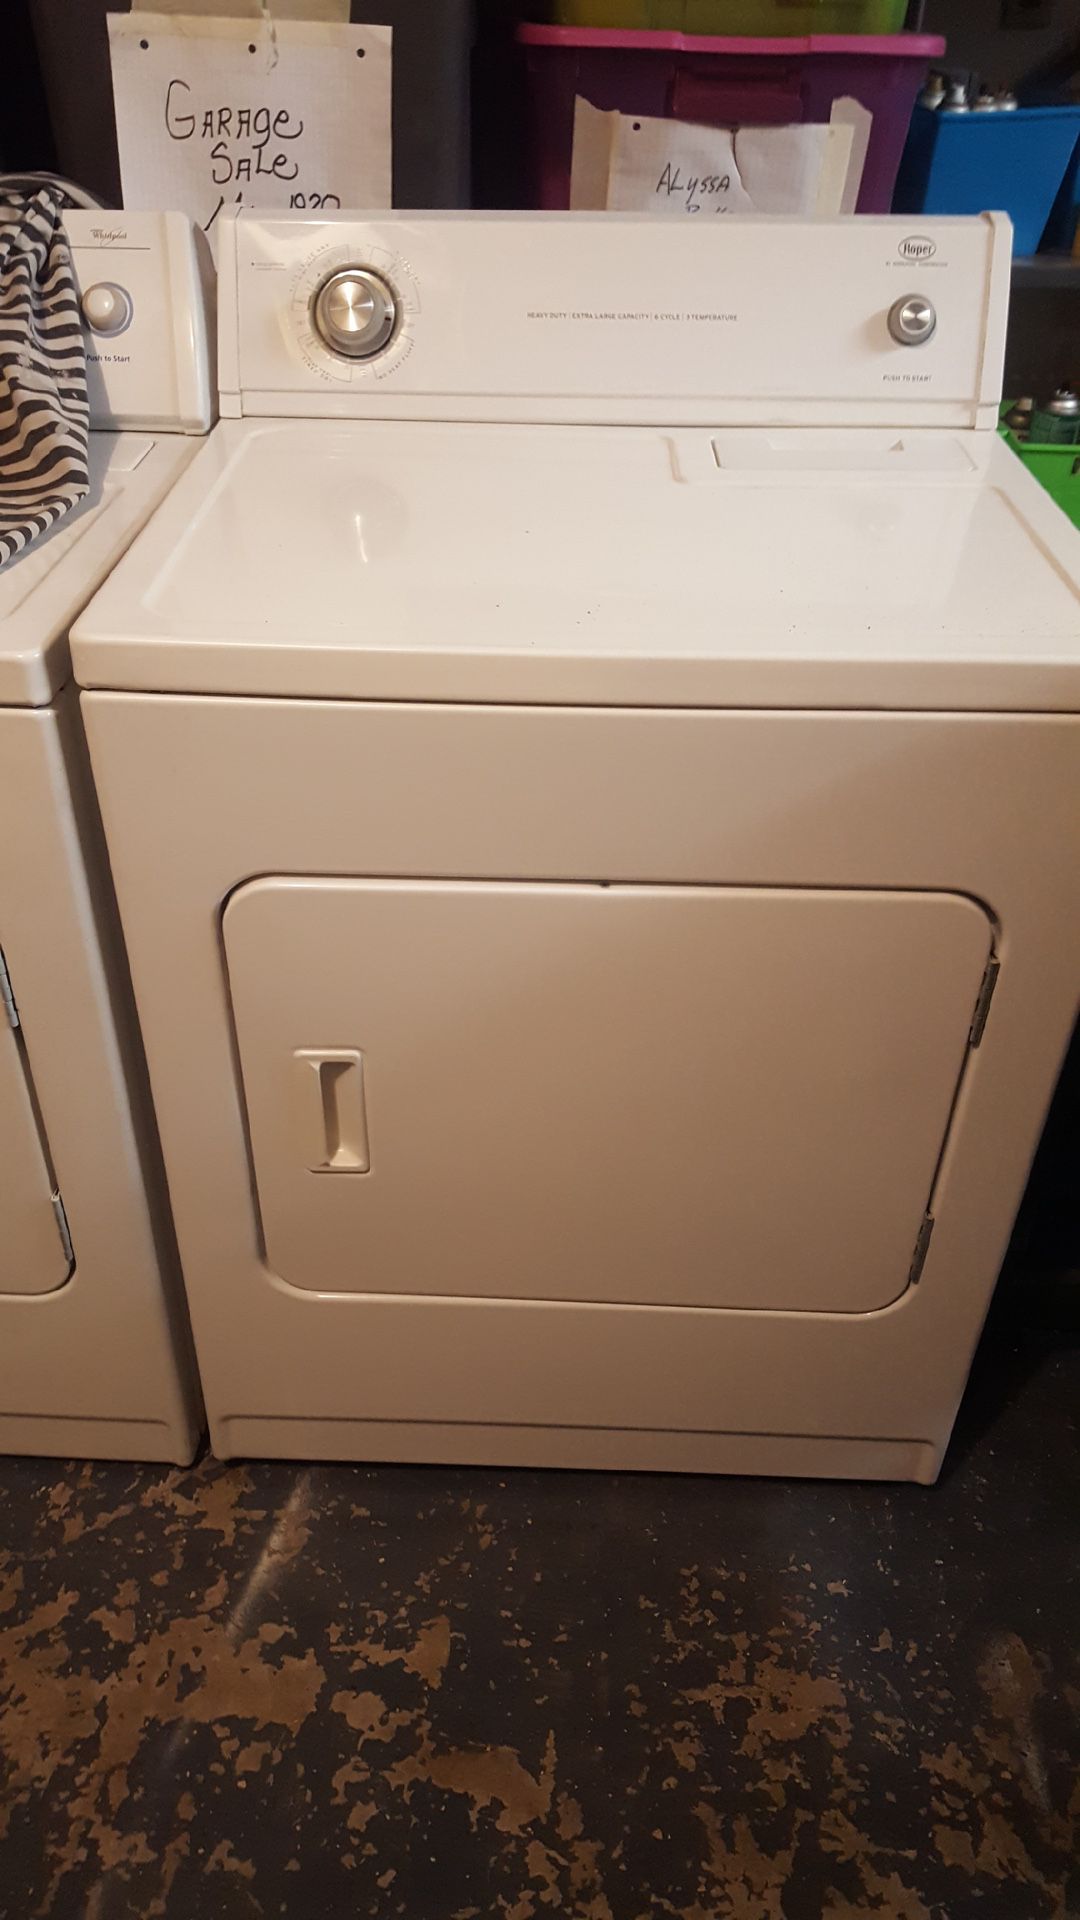 Roper clothes dryer (electric). Completely reconditioned